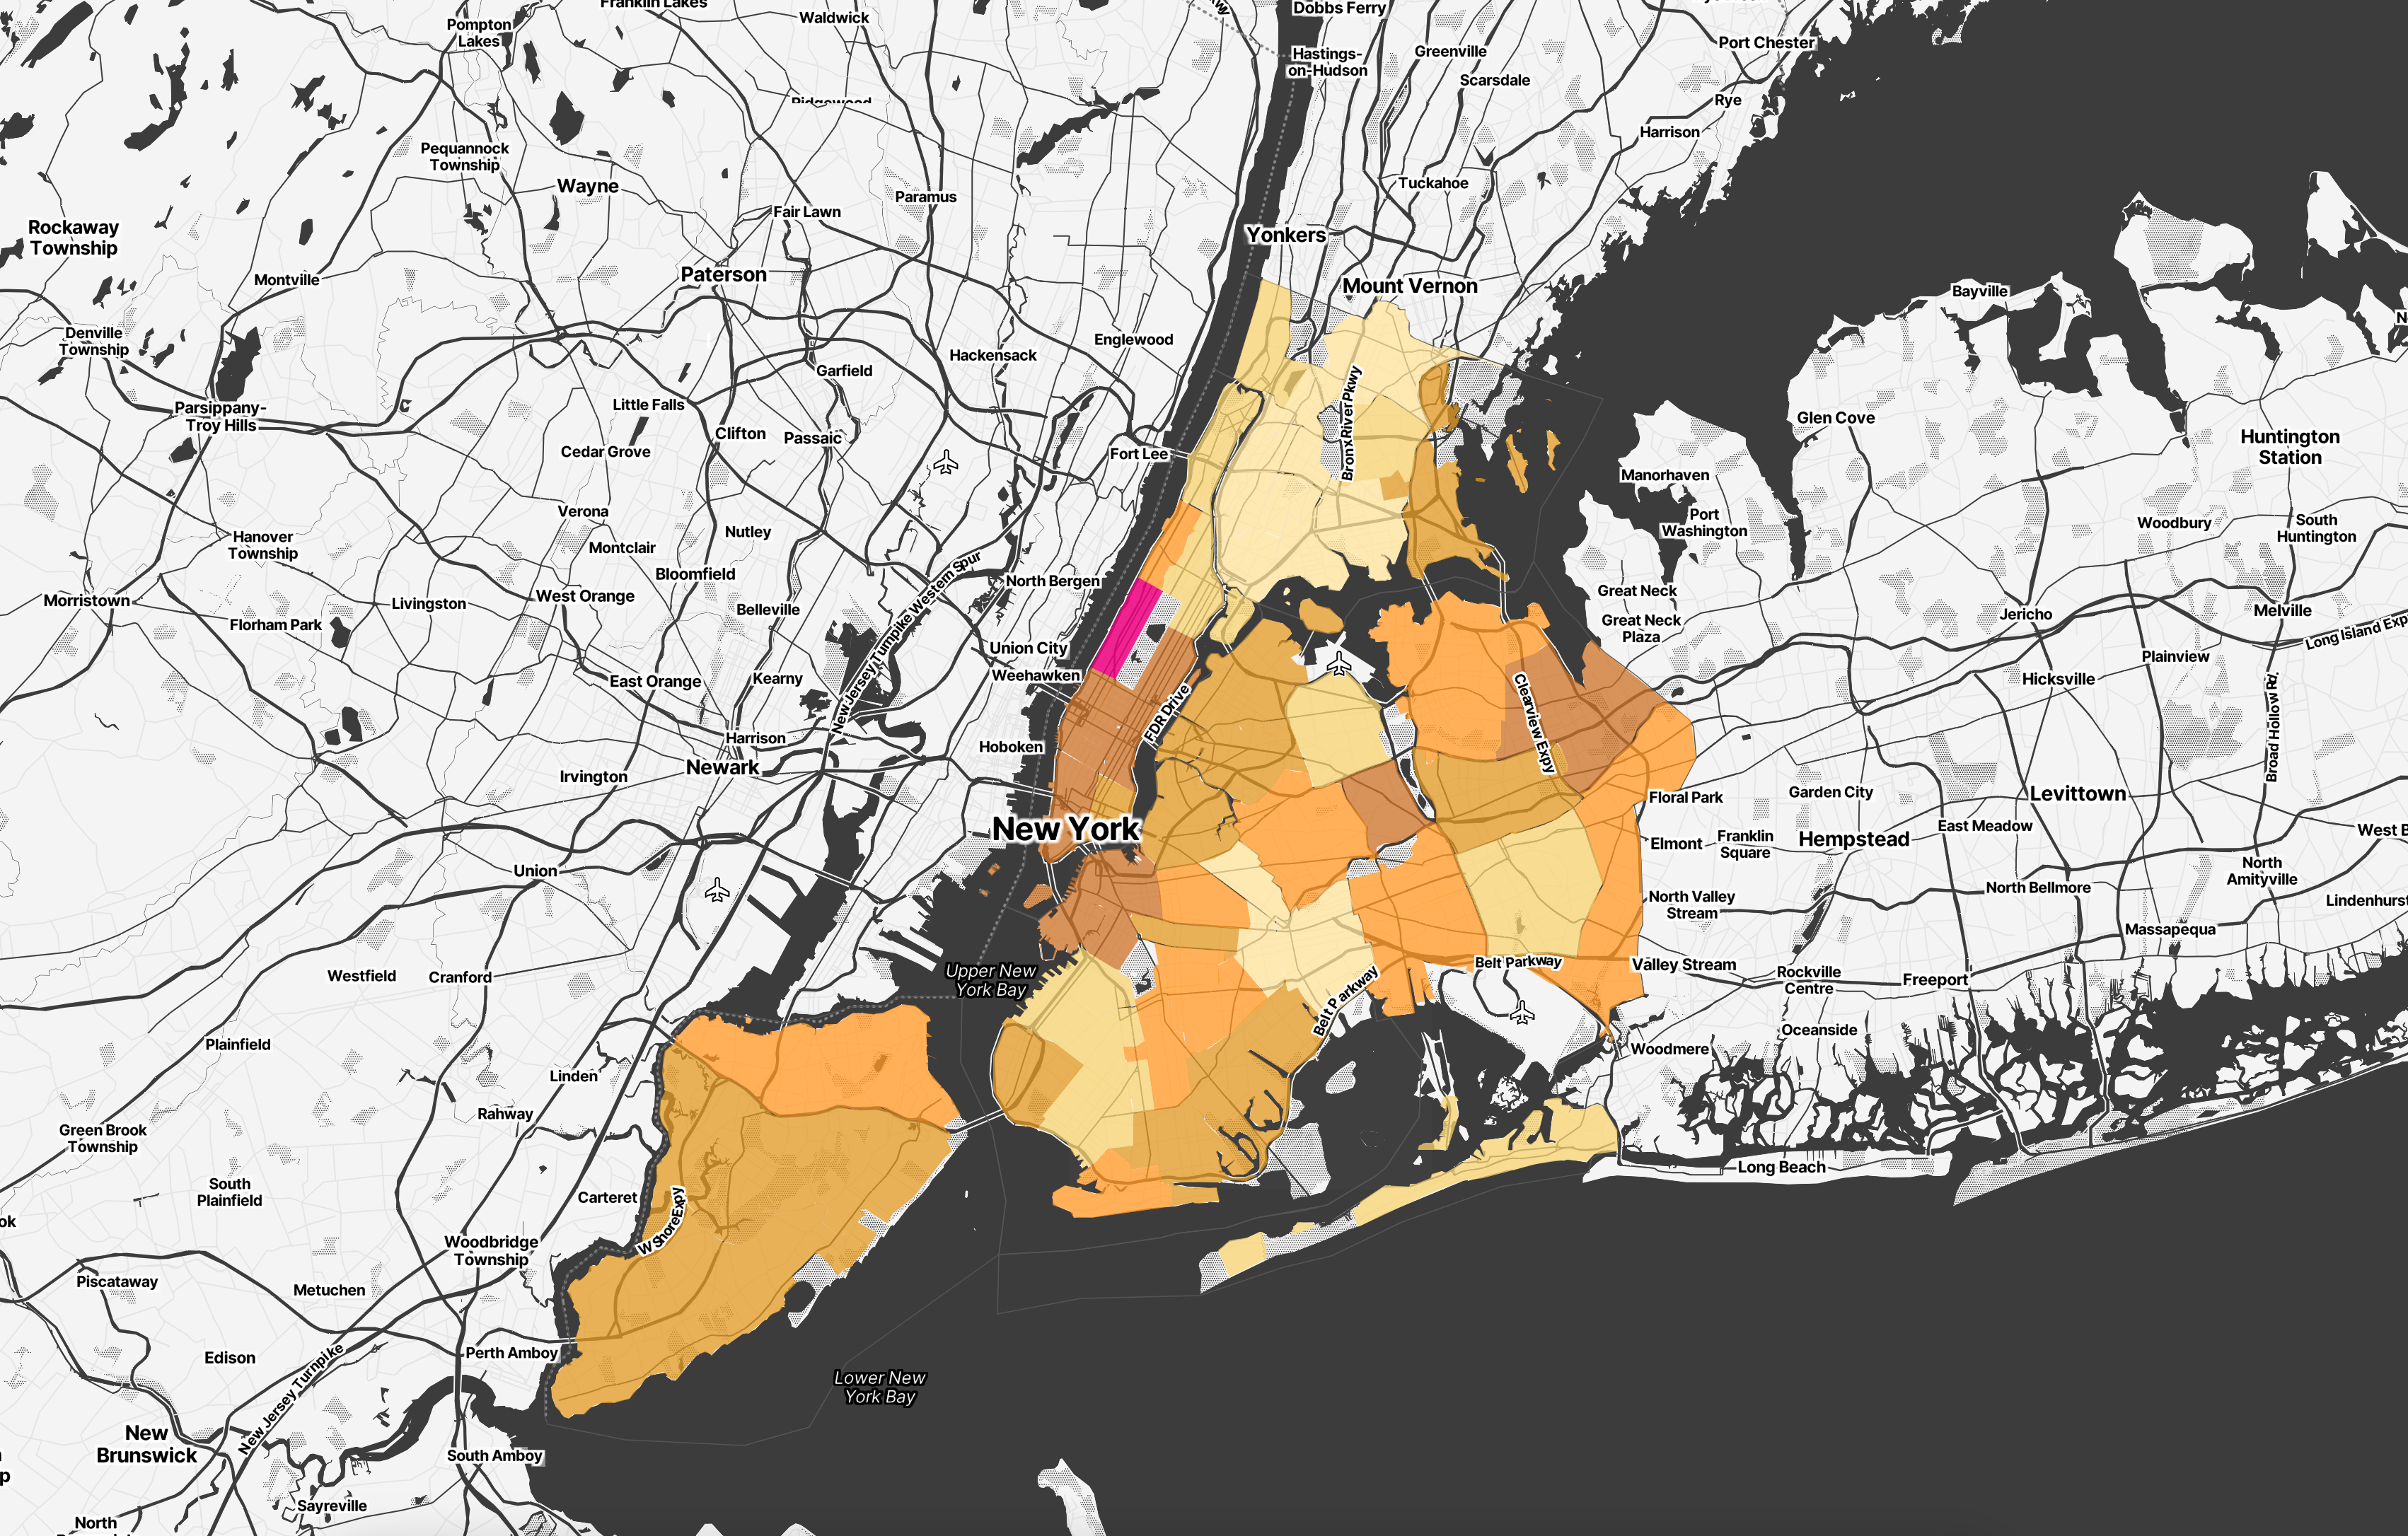 An image of a choropleth map of NYC.